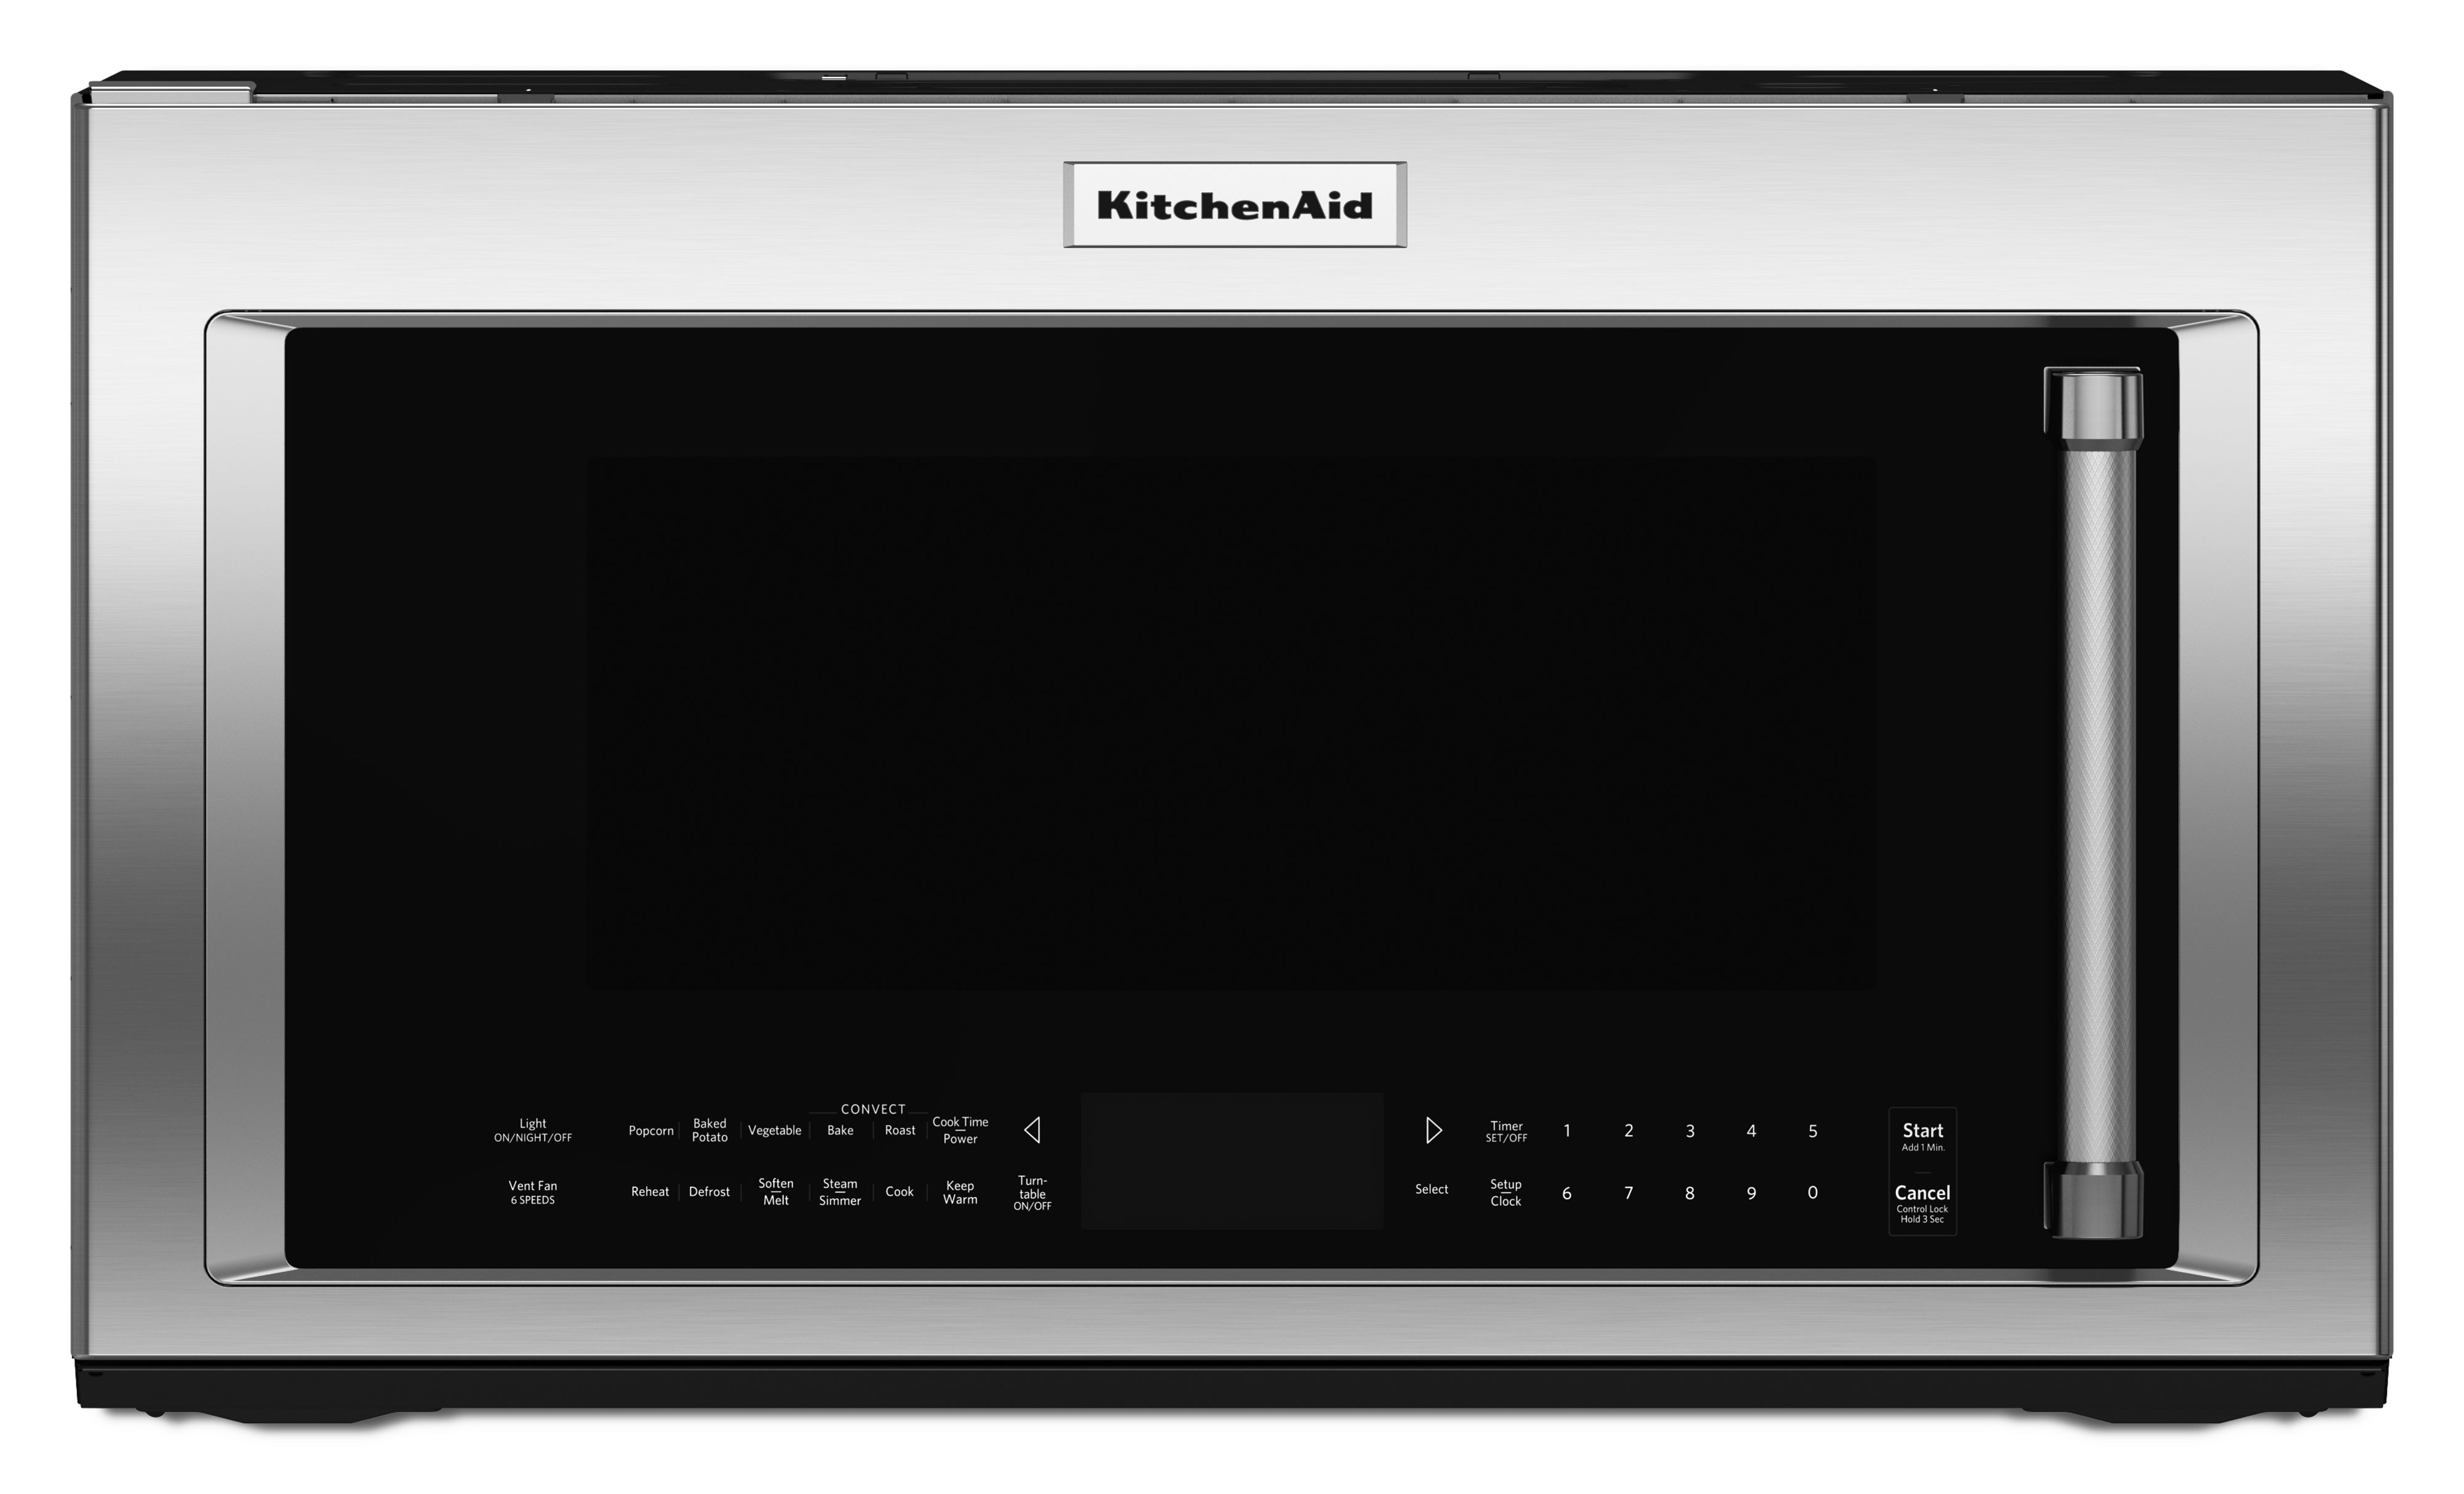 Kitchenaid KMHC319ESS 30 Inch Over the Range Microwave with 6 Fan